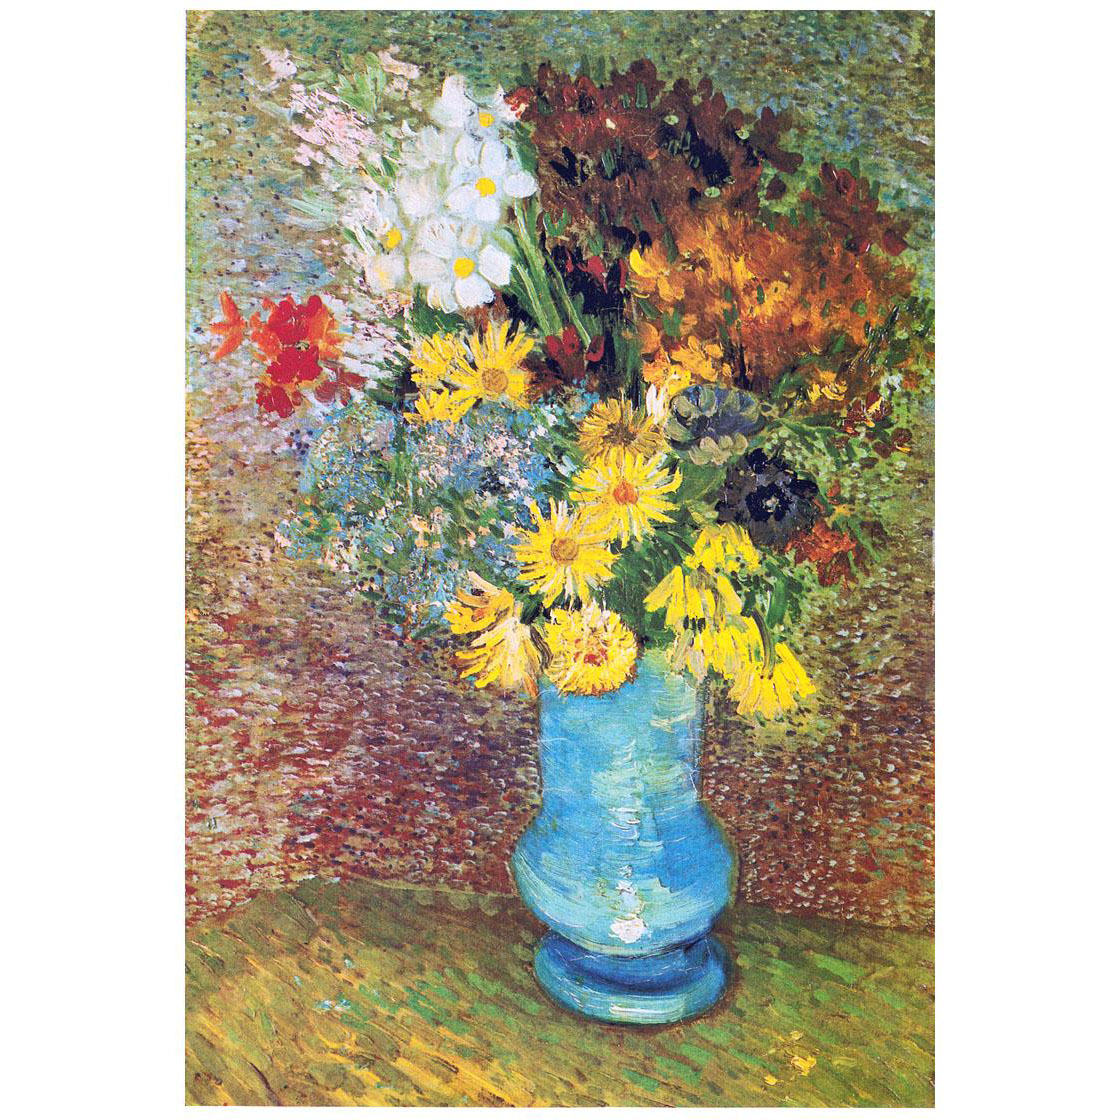 Vincent van Gogh. Vase with Daisies and Anemones. 1887. Kroller-Muller Museum Otterlo